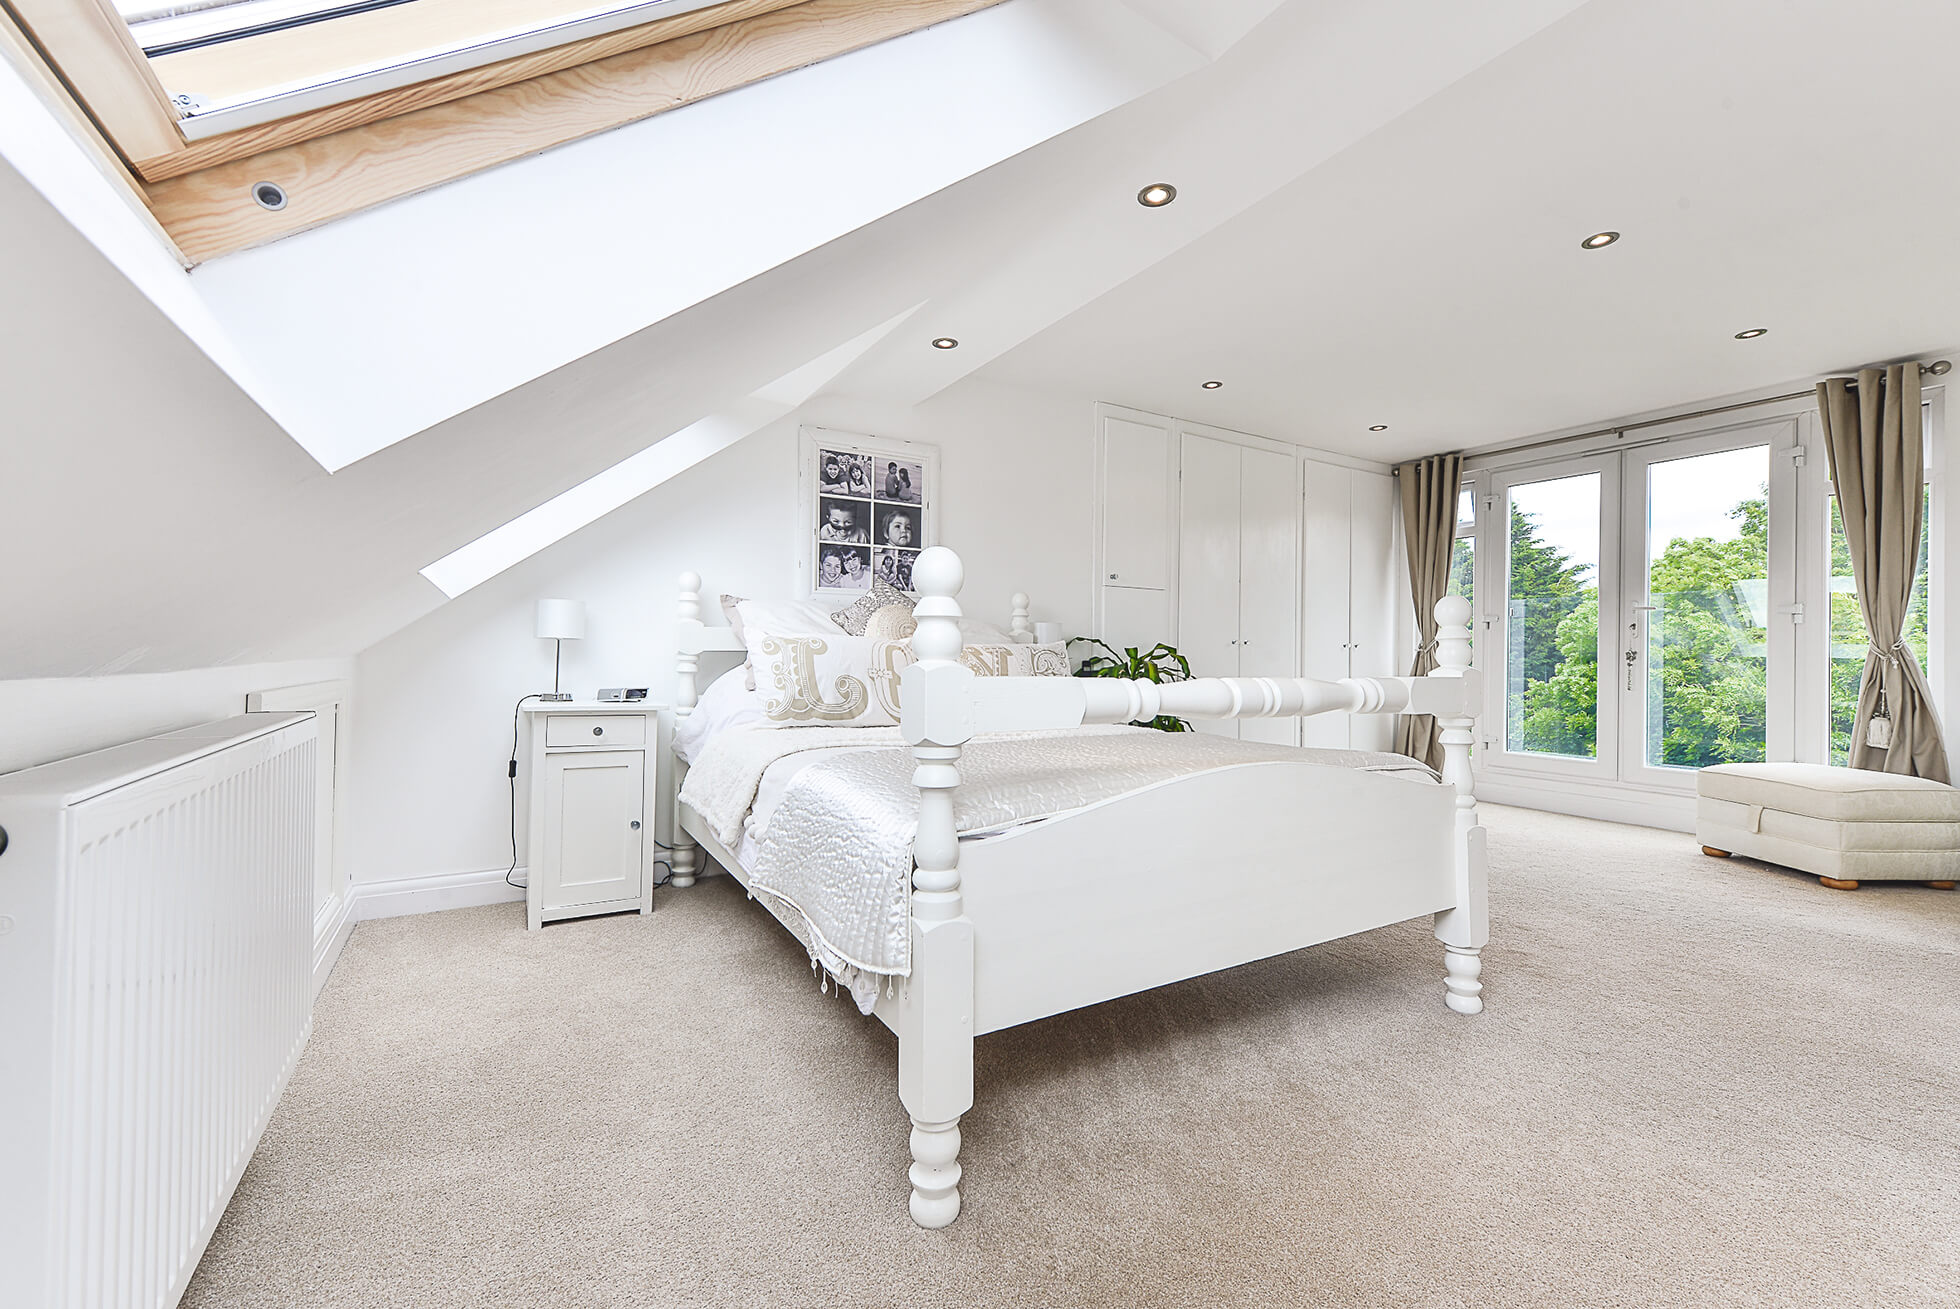 Do you have a question about converting your Loft in Hatfield? Here are the most popular questions asked by our clients.